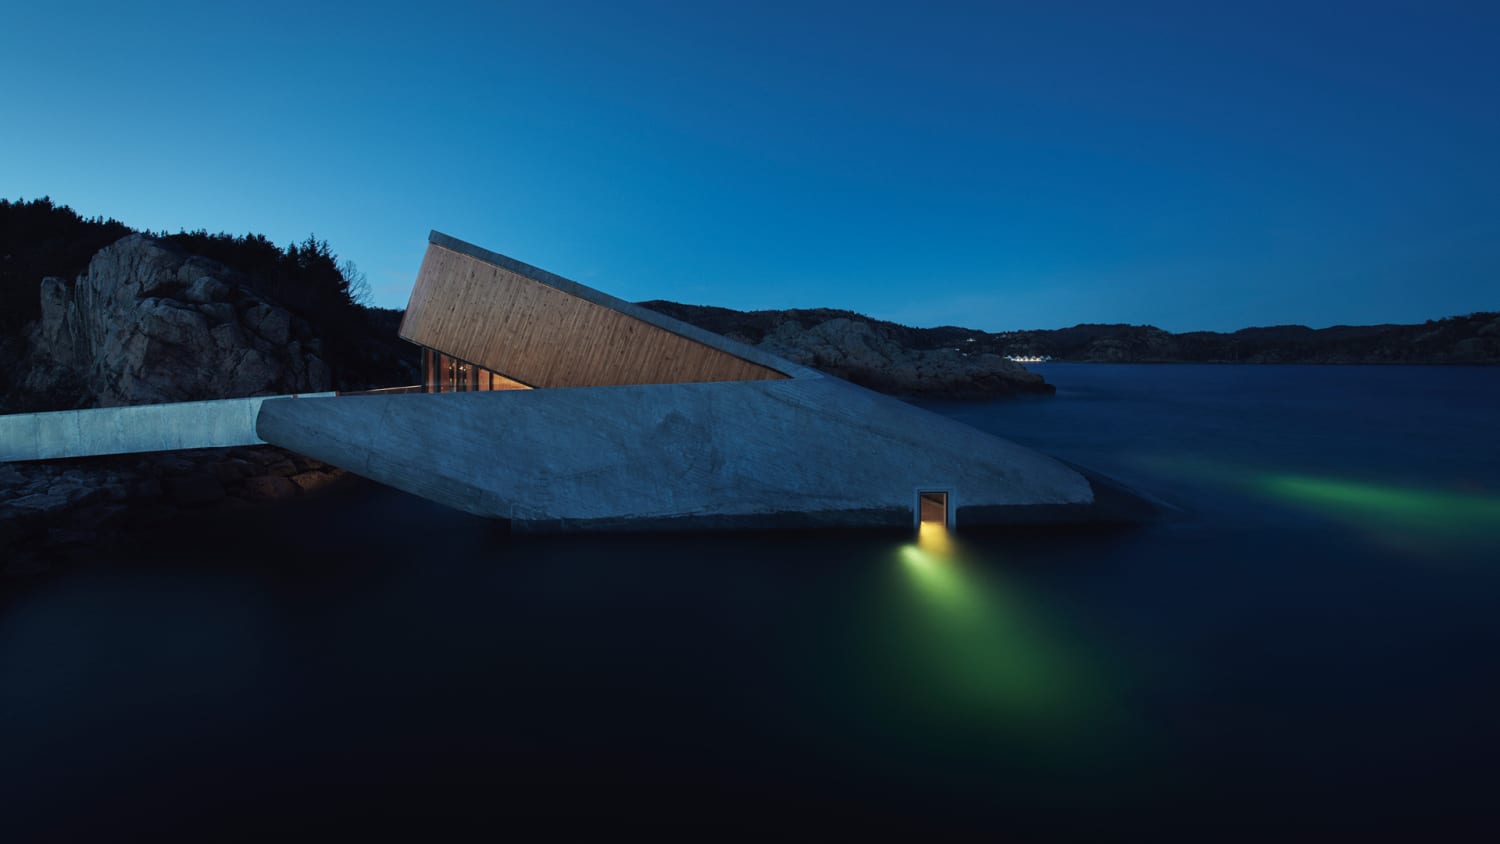 This is an underwater restaurant in Norway, 5m down to seabed